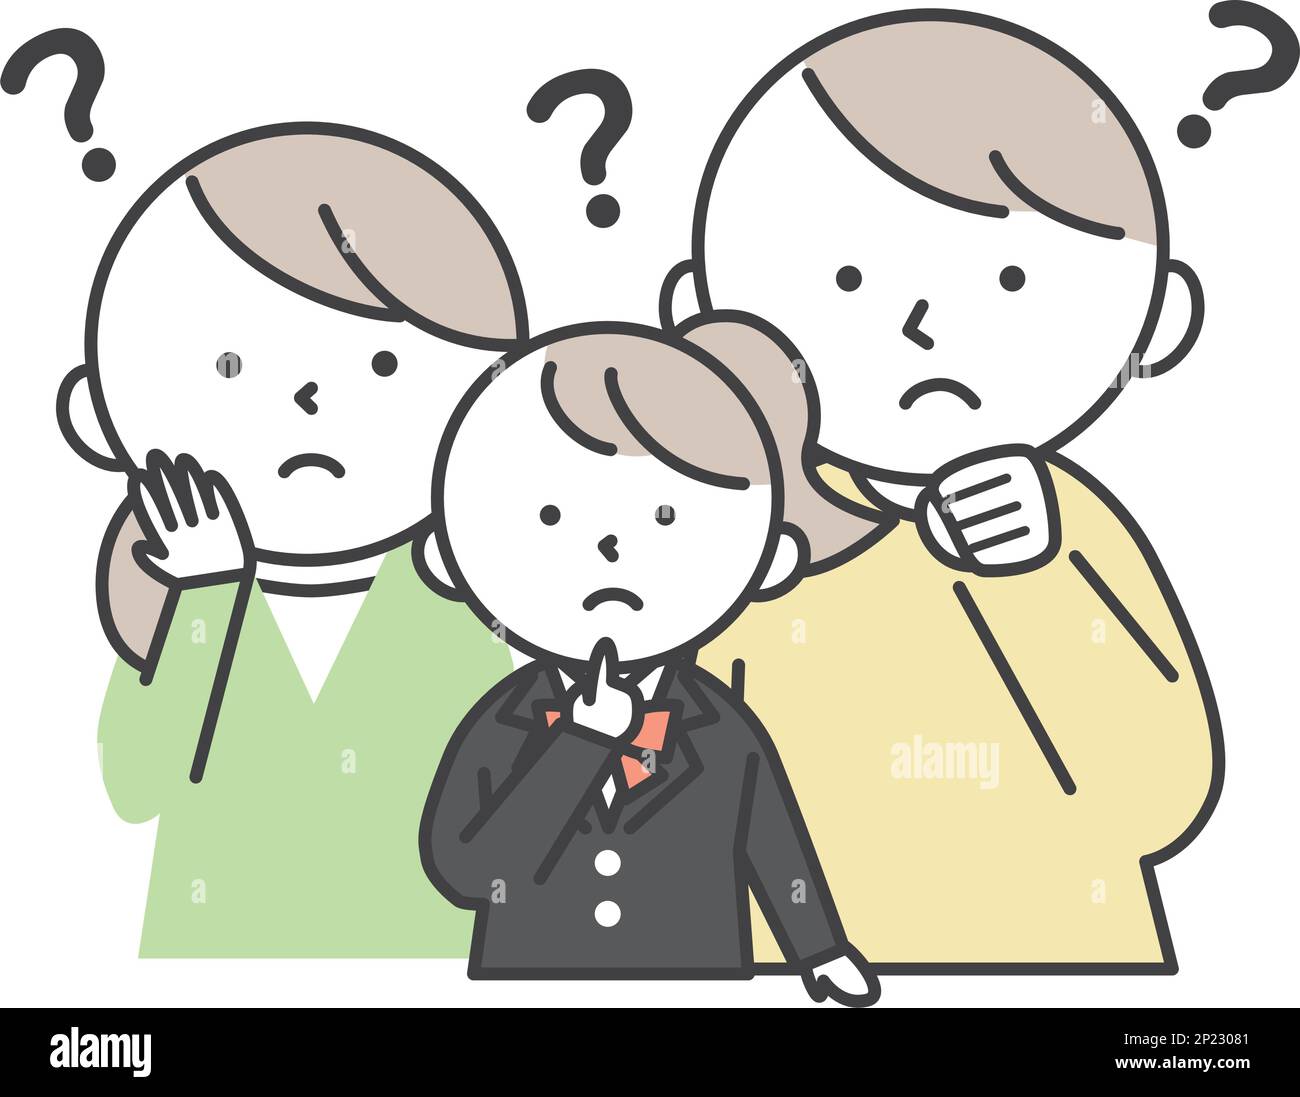 A female student with a worried expression wearing a blazer uniform and her parents. Family illustration of daughter and parents. Simple style illustr Stock Vector